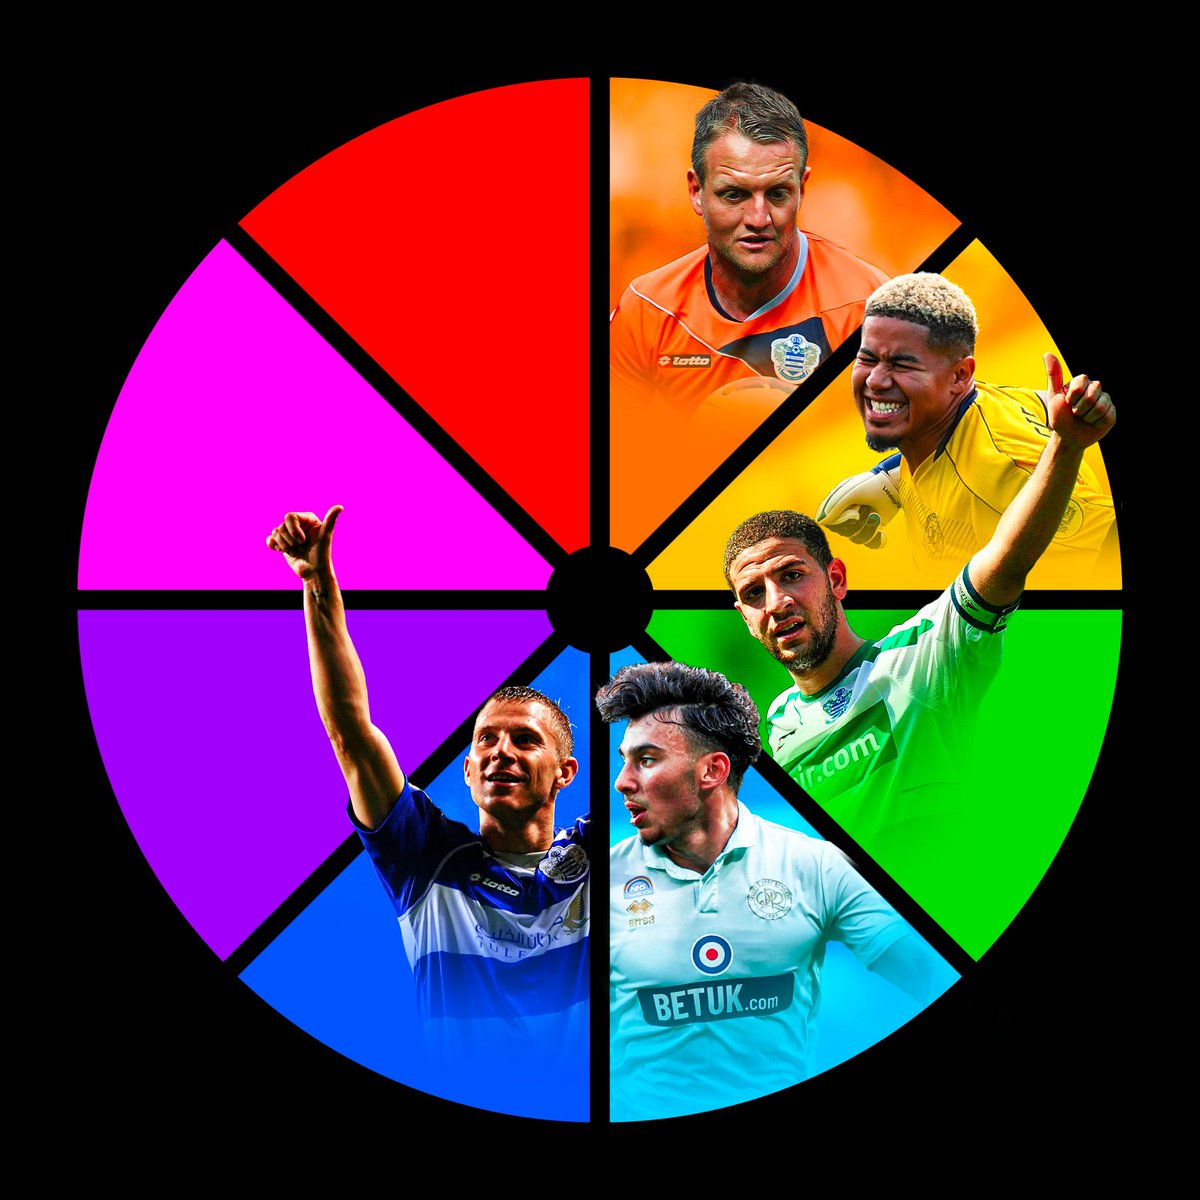 Have I mentioned he’s my Uncle?

Martin Rowlands takes up our 5th spot

Now it’s quite a tricky colour next but which Keeper have I chosen? 🧤

50 Likes to unlock it!

#smsports #QPR #colourwheelchallenge